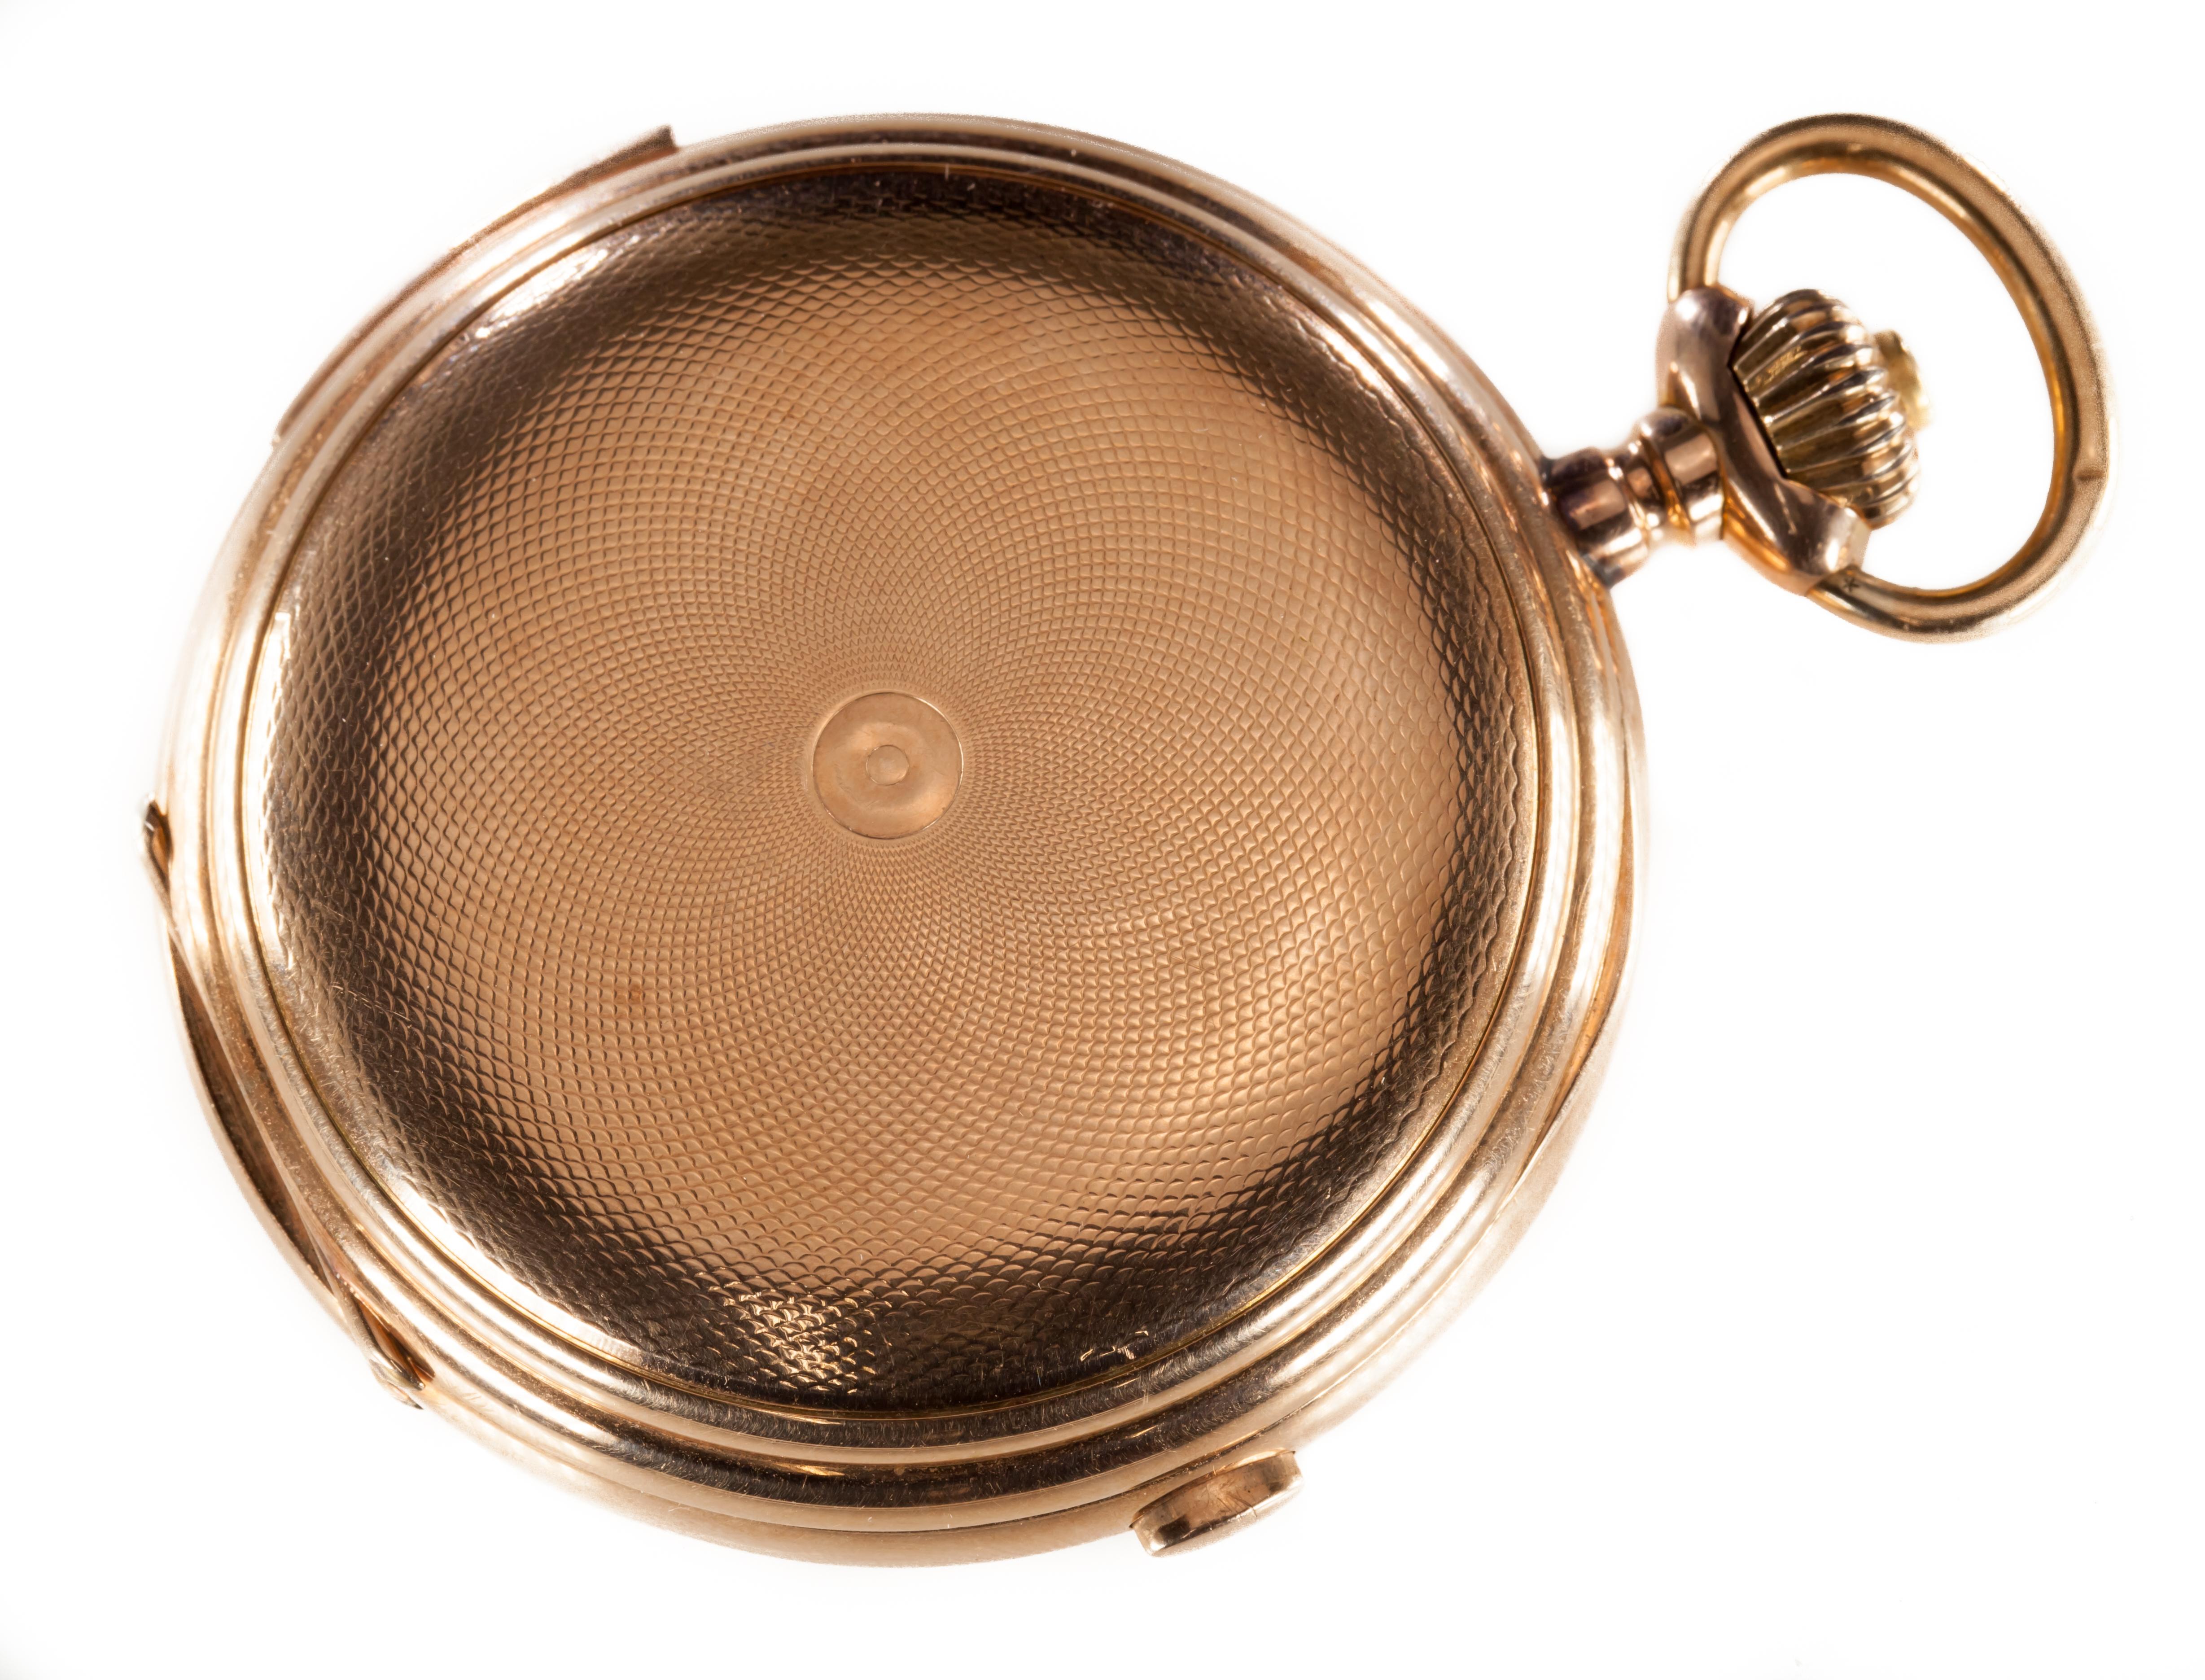 Beautifully Crafted Pocket Watch by Valdor
Includes Date Dial, Moonphase, and Quarter Repeater
Inner Cover Reads:
Valdor / Repetition Quart & Minutes Chronographe / Triple quanlieme phases de lune a Guichet / Remontoir Ancre Ligne Droite / Spiral